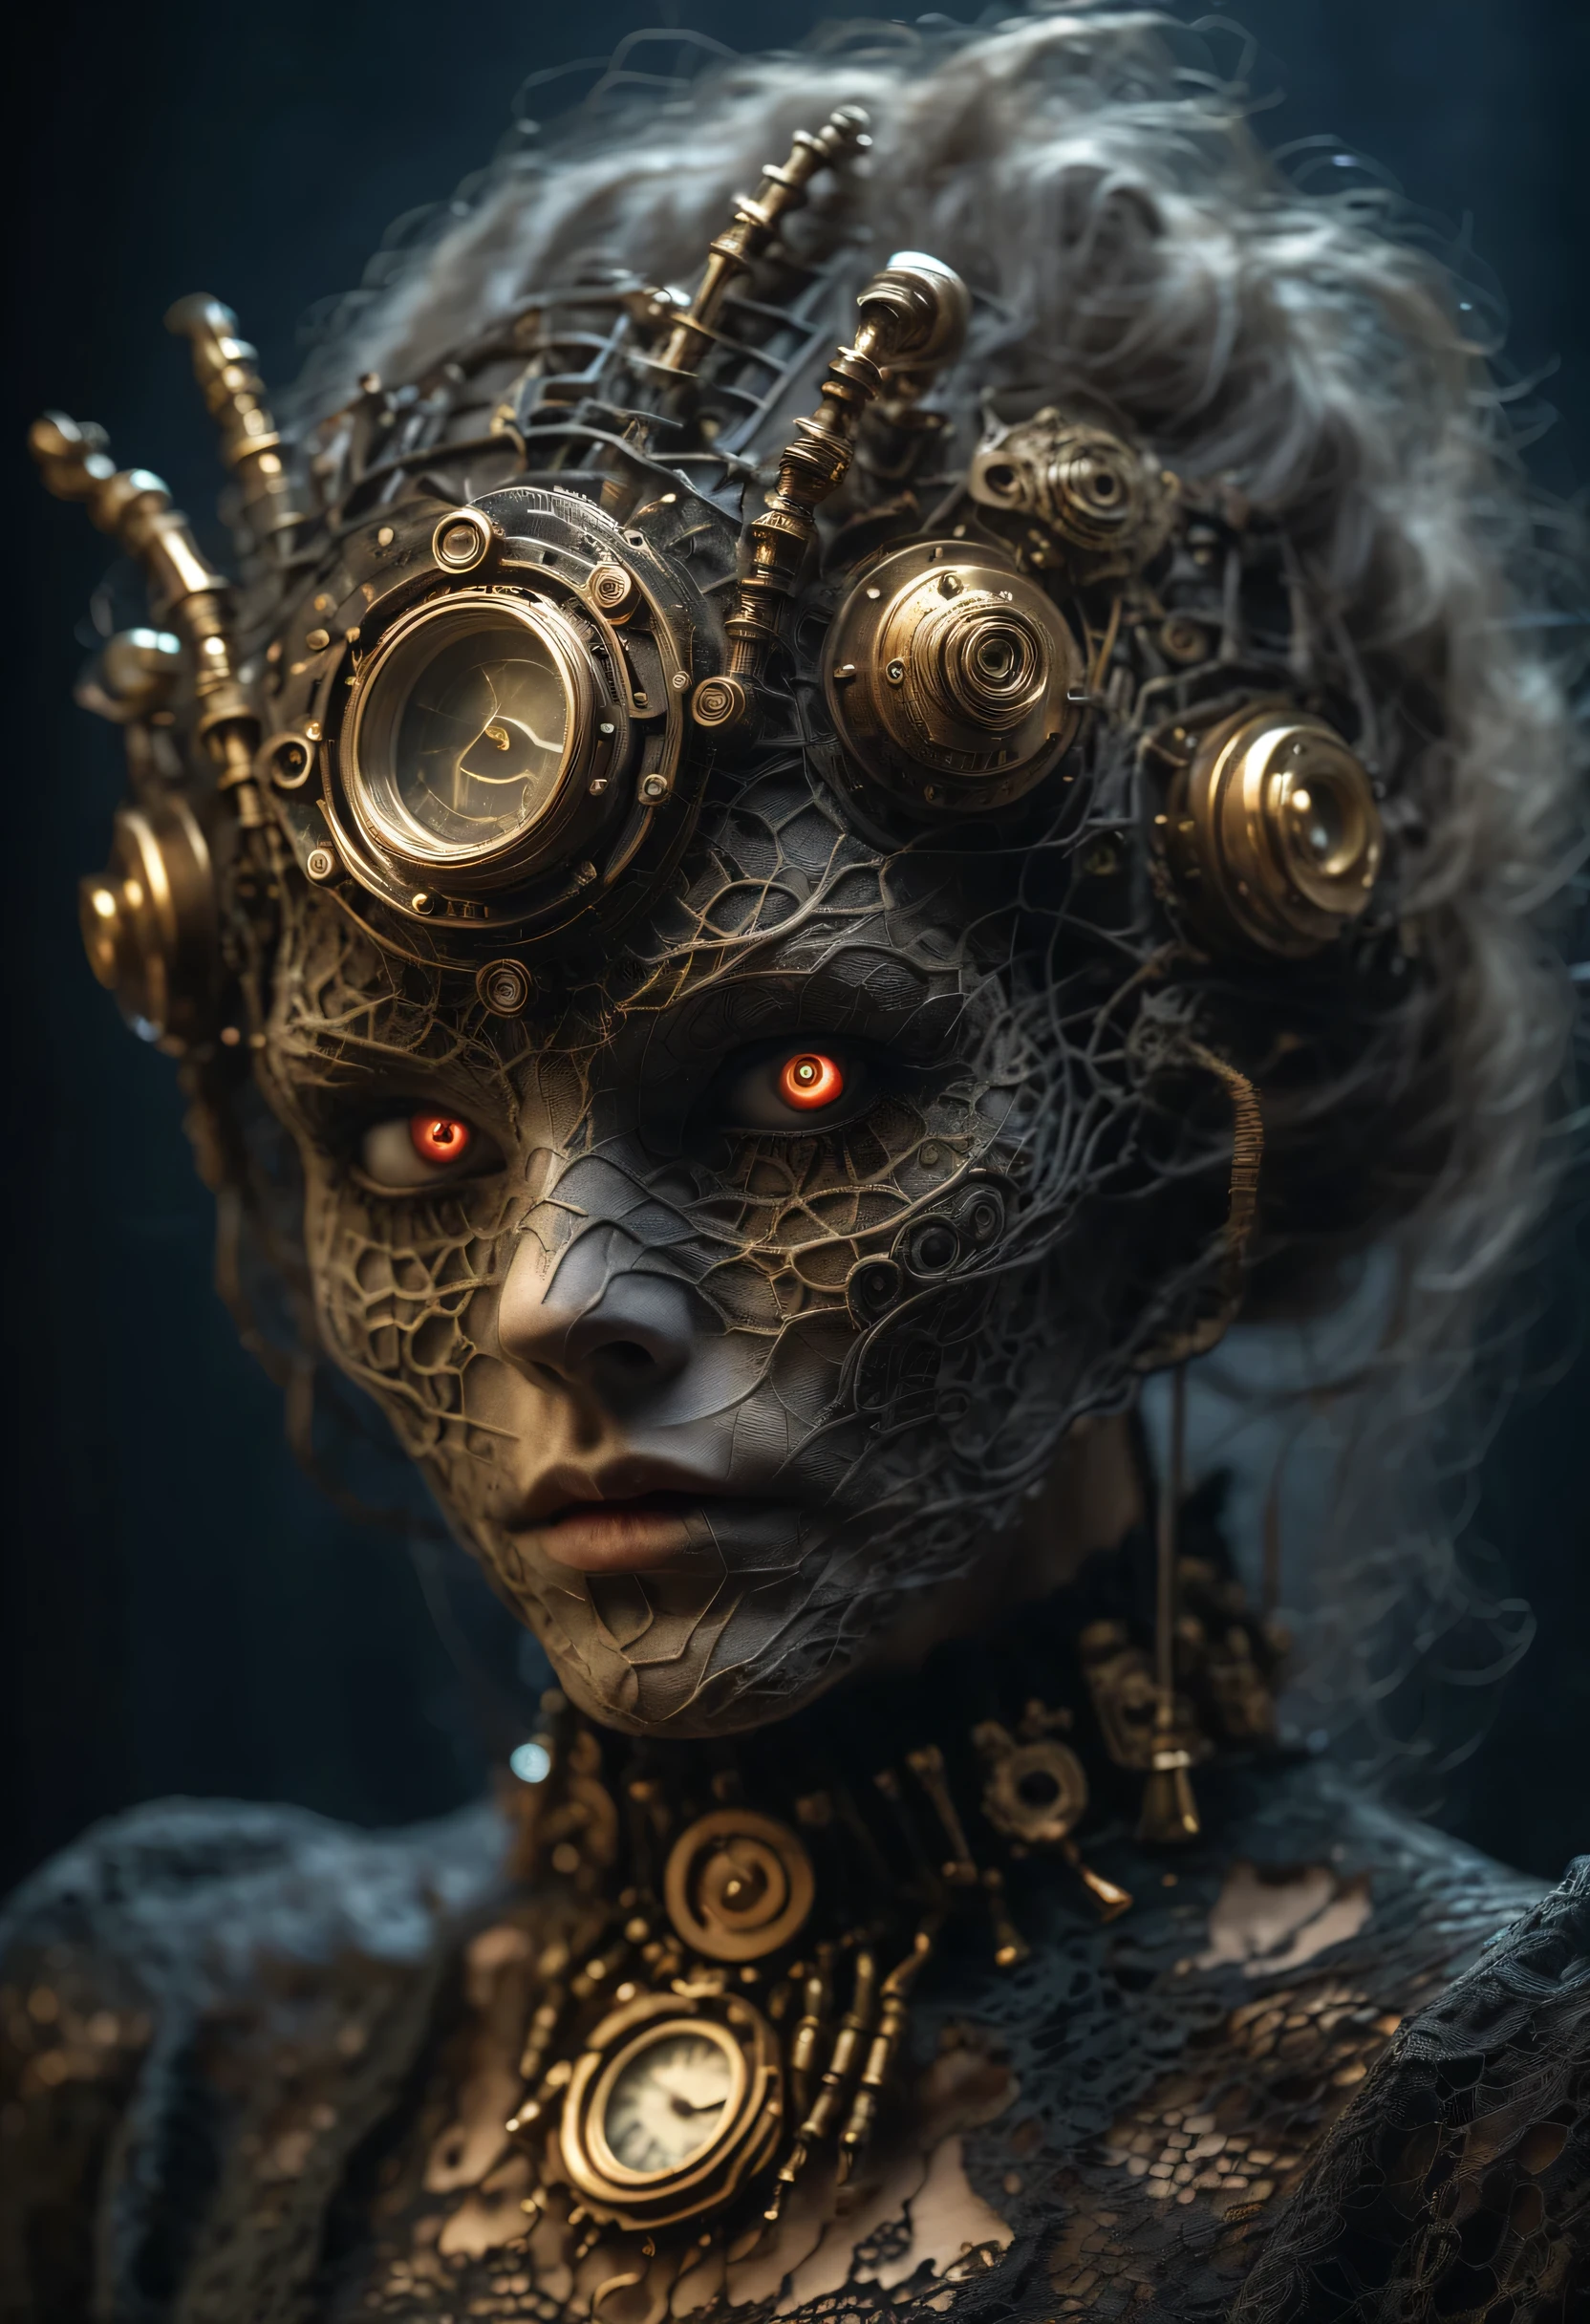 eyes and face, Complex mechanisms, metallic feel, dark and mysterious atmosphere, a haunting reality, dramatic lighting, Aged and weathered appearance, Steampunk elements, Weird and surreal atmosphere, intricate lace pattern, film composition, exquisite craft, Gothic aesthetics, unforgettably beautiful+,[high dynamic range],[fear],[concept artist],[sharp focus],[professional],[bright colors],[Bokeh]